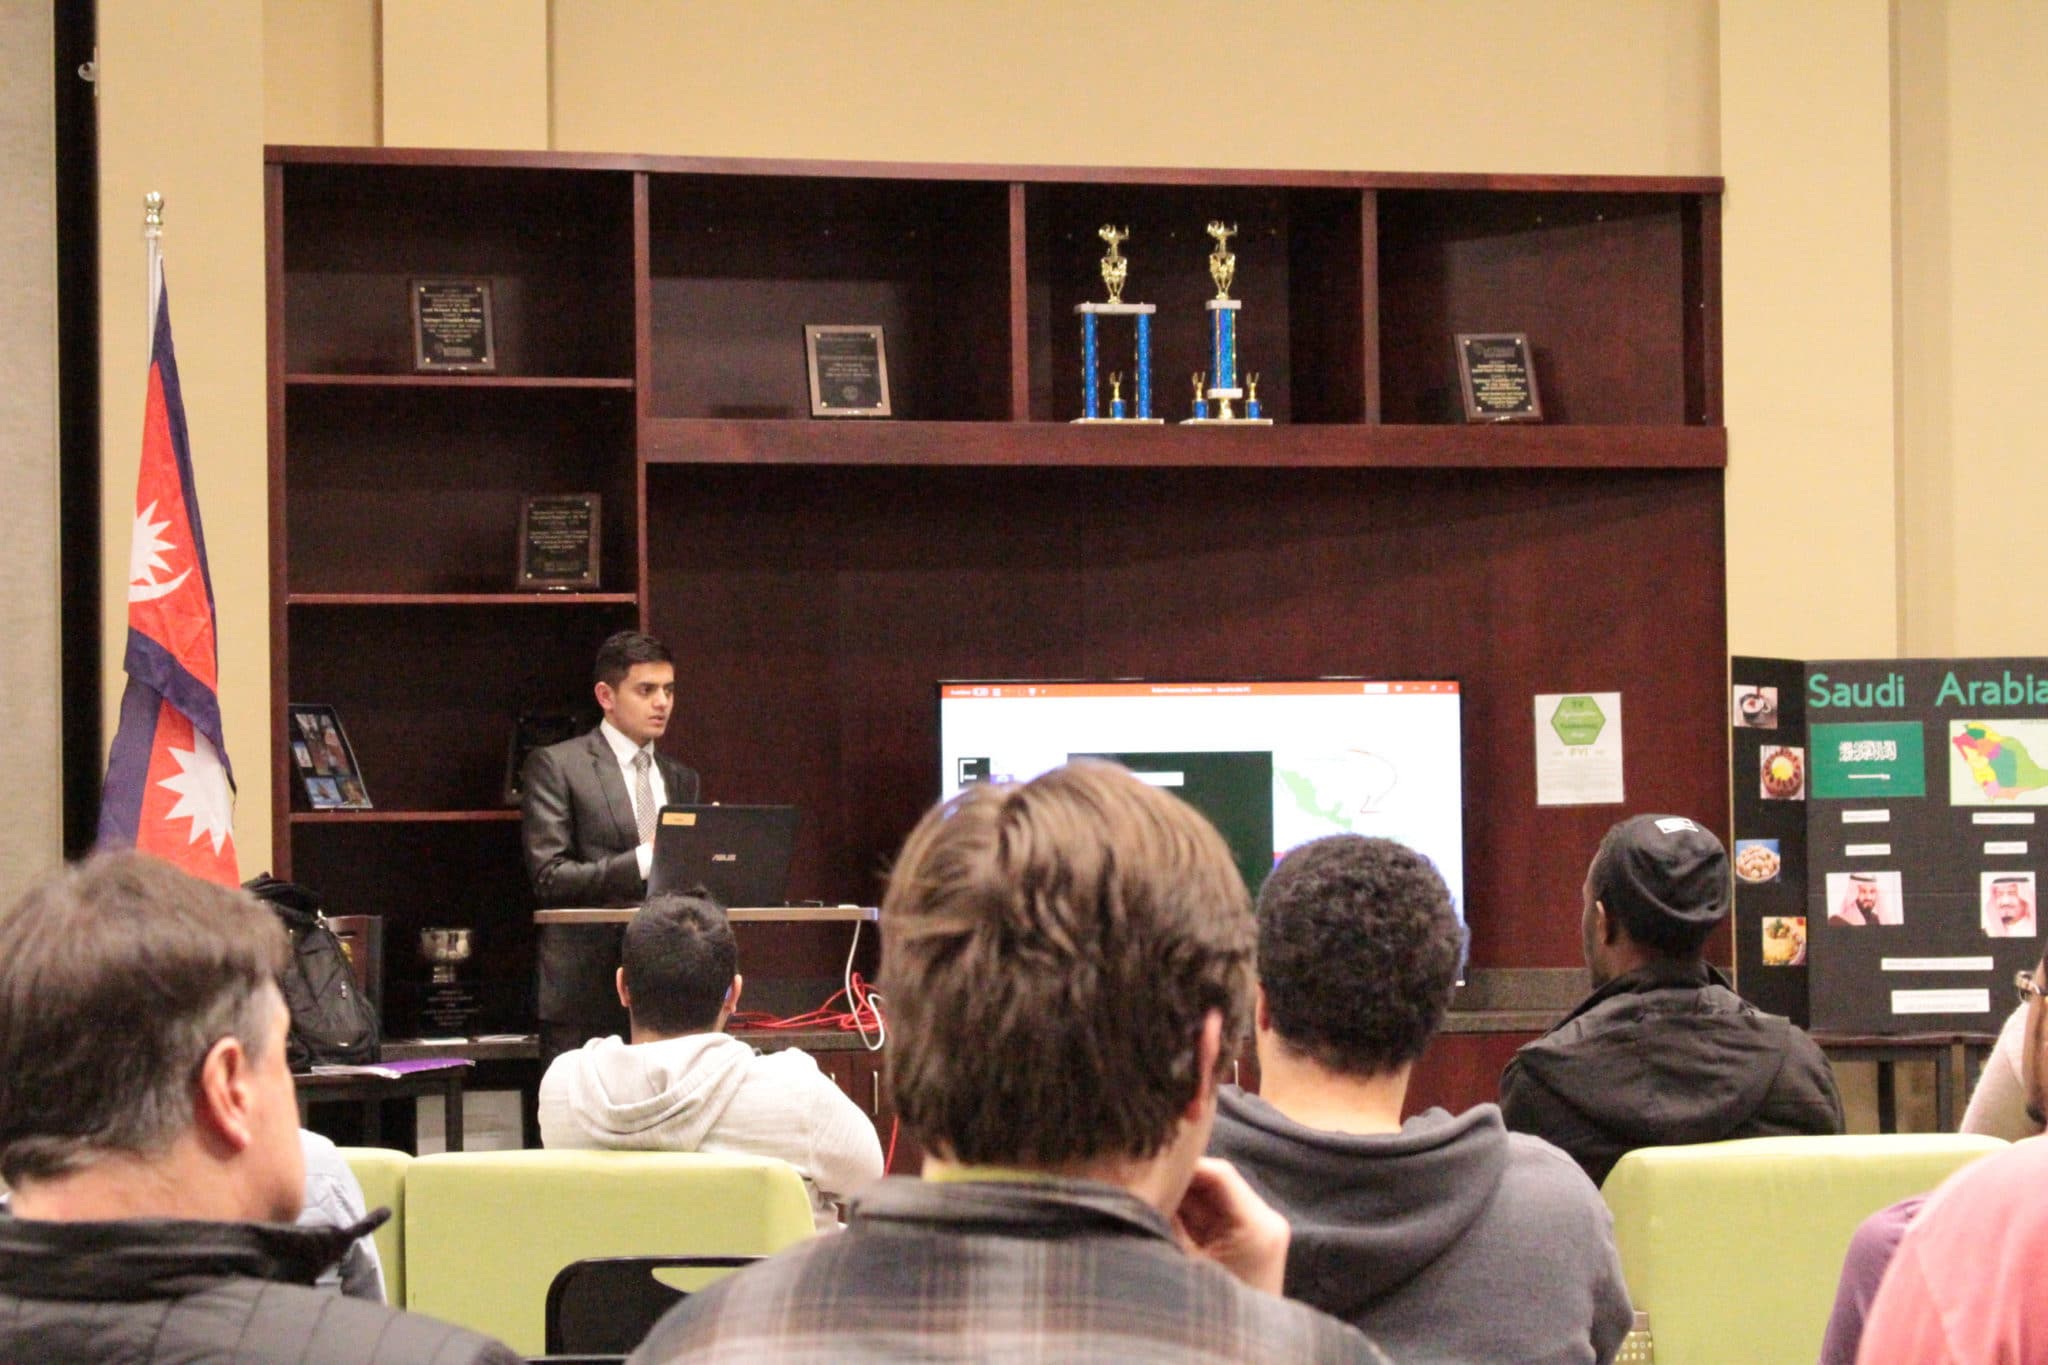 Minus is pictured making a presentation at the HC Franklin Residence Hall.